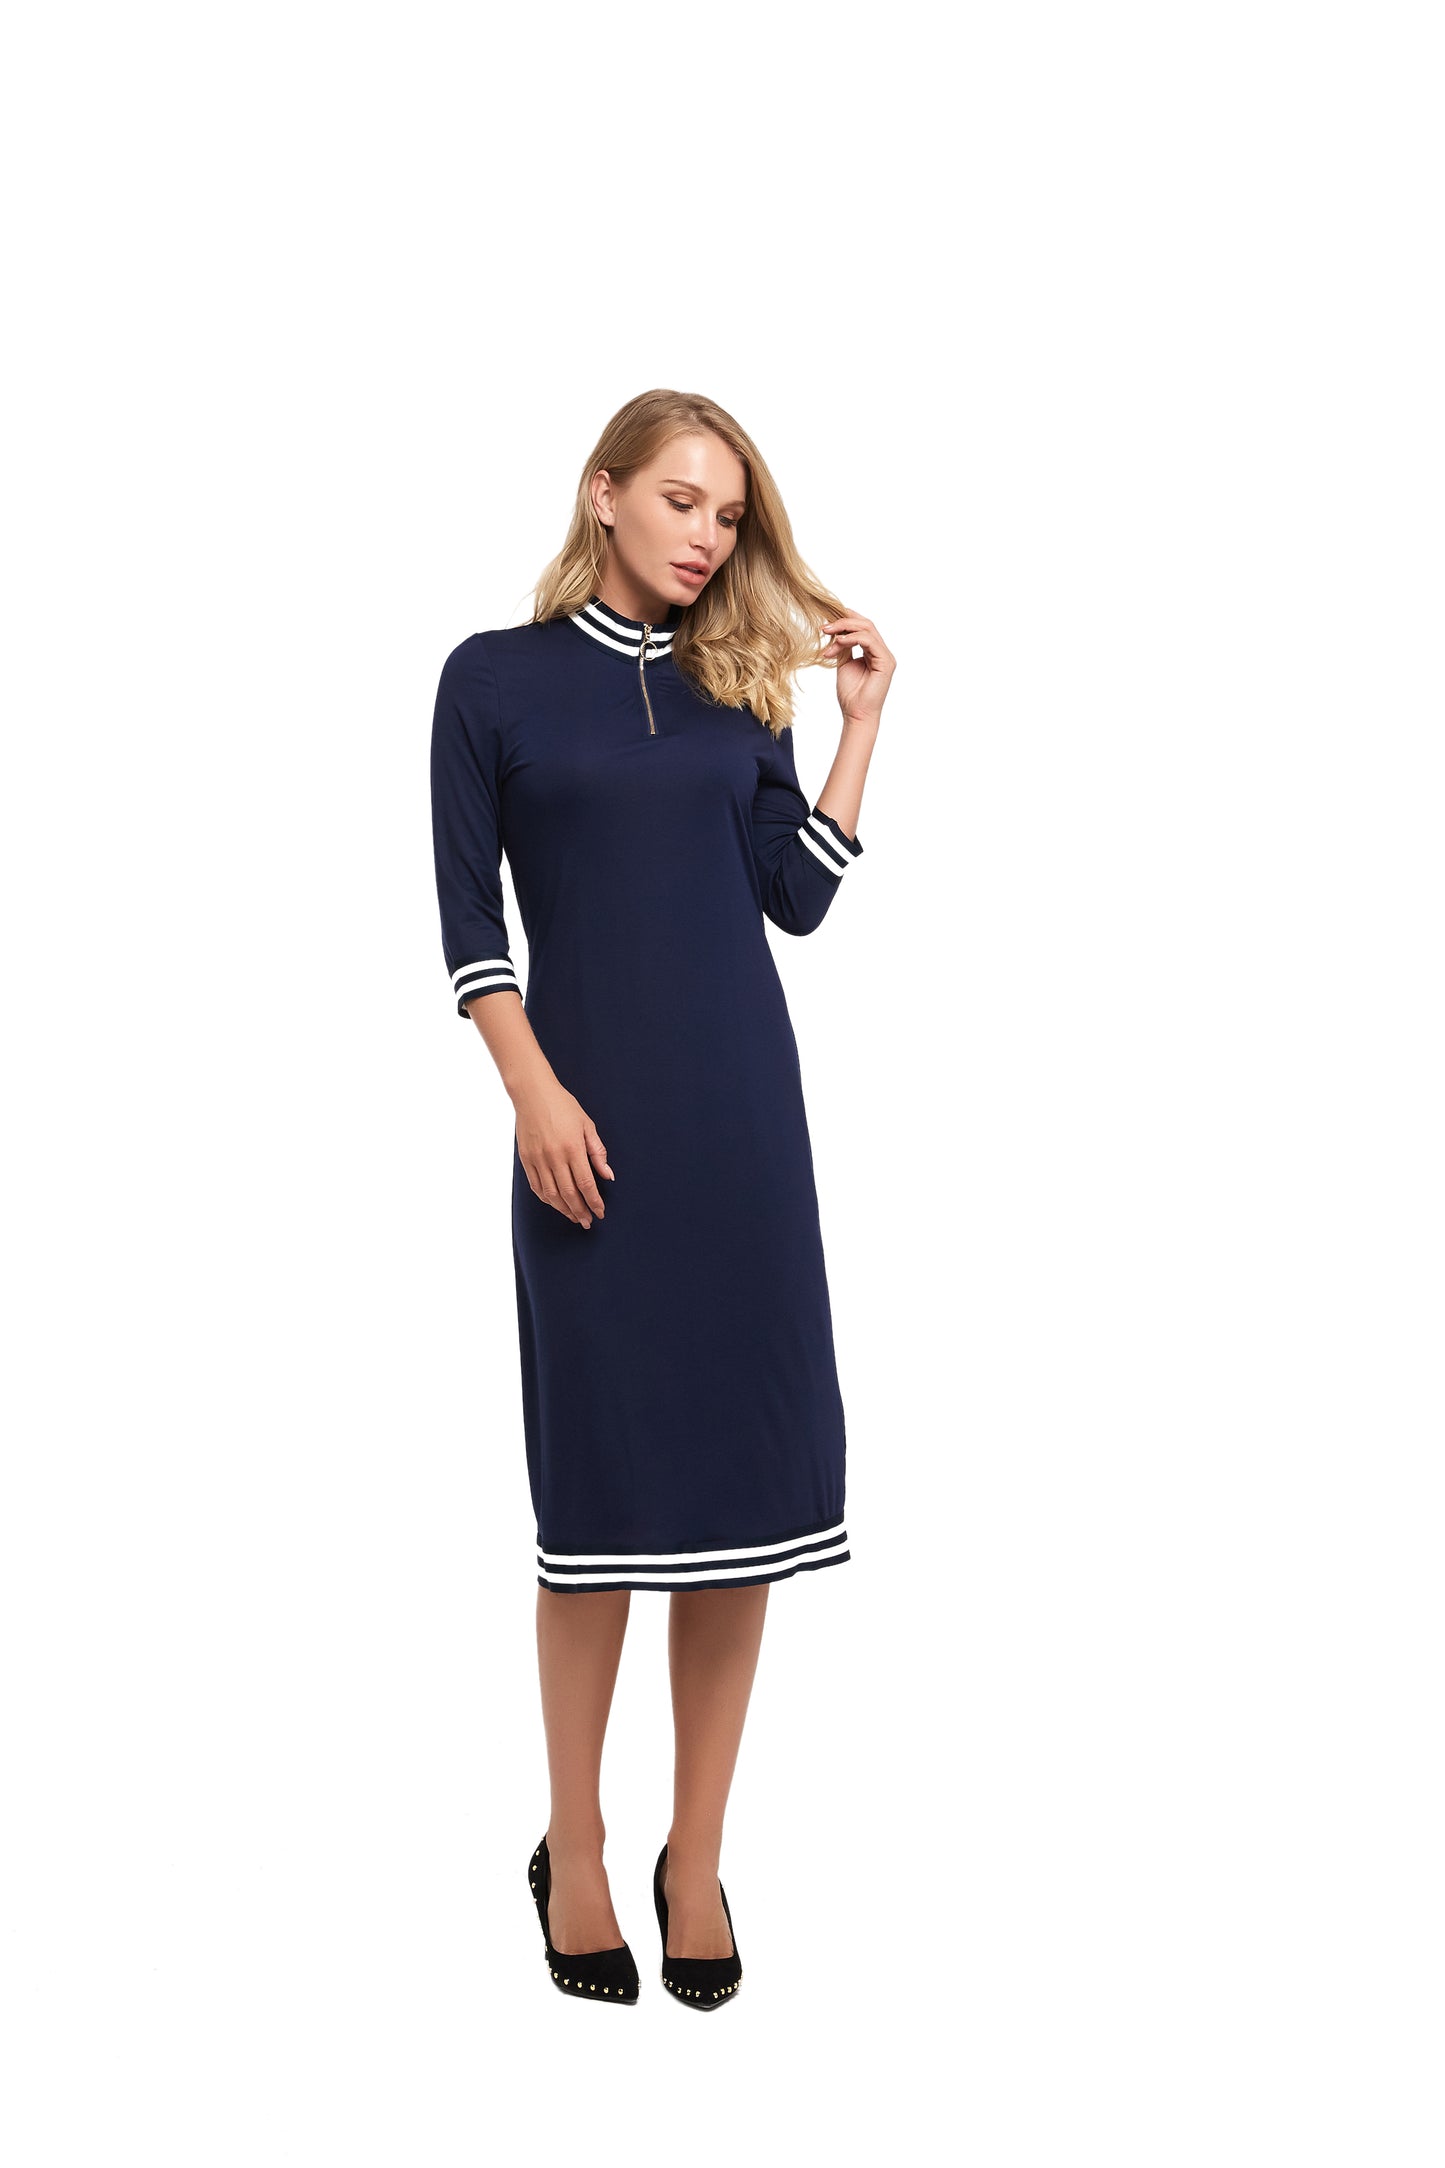 Modest Dress with 3/4 Sleeve and Striped Band Detail - alamaud